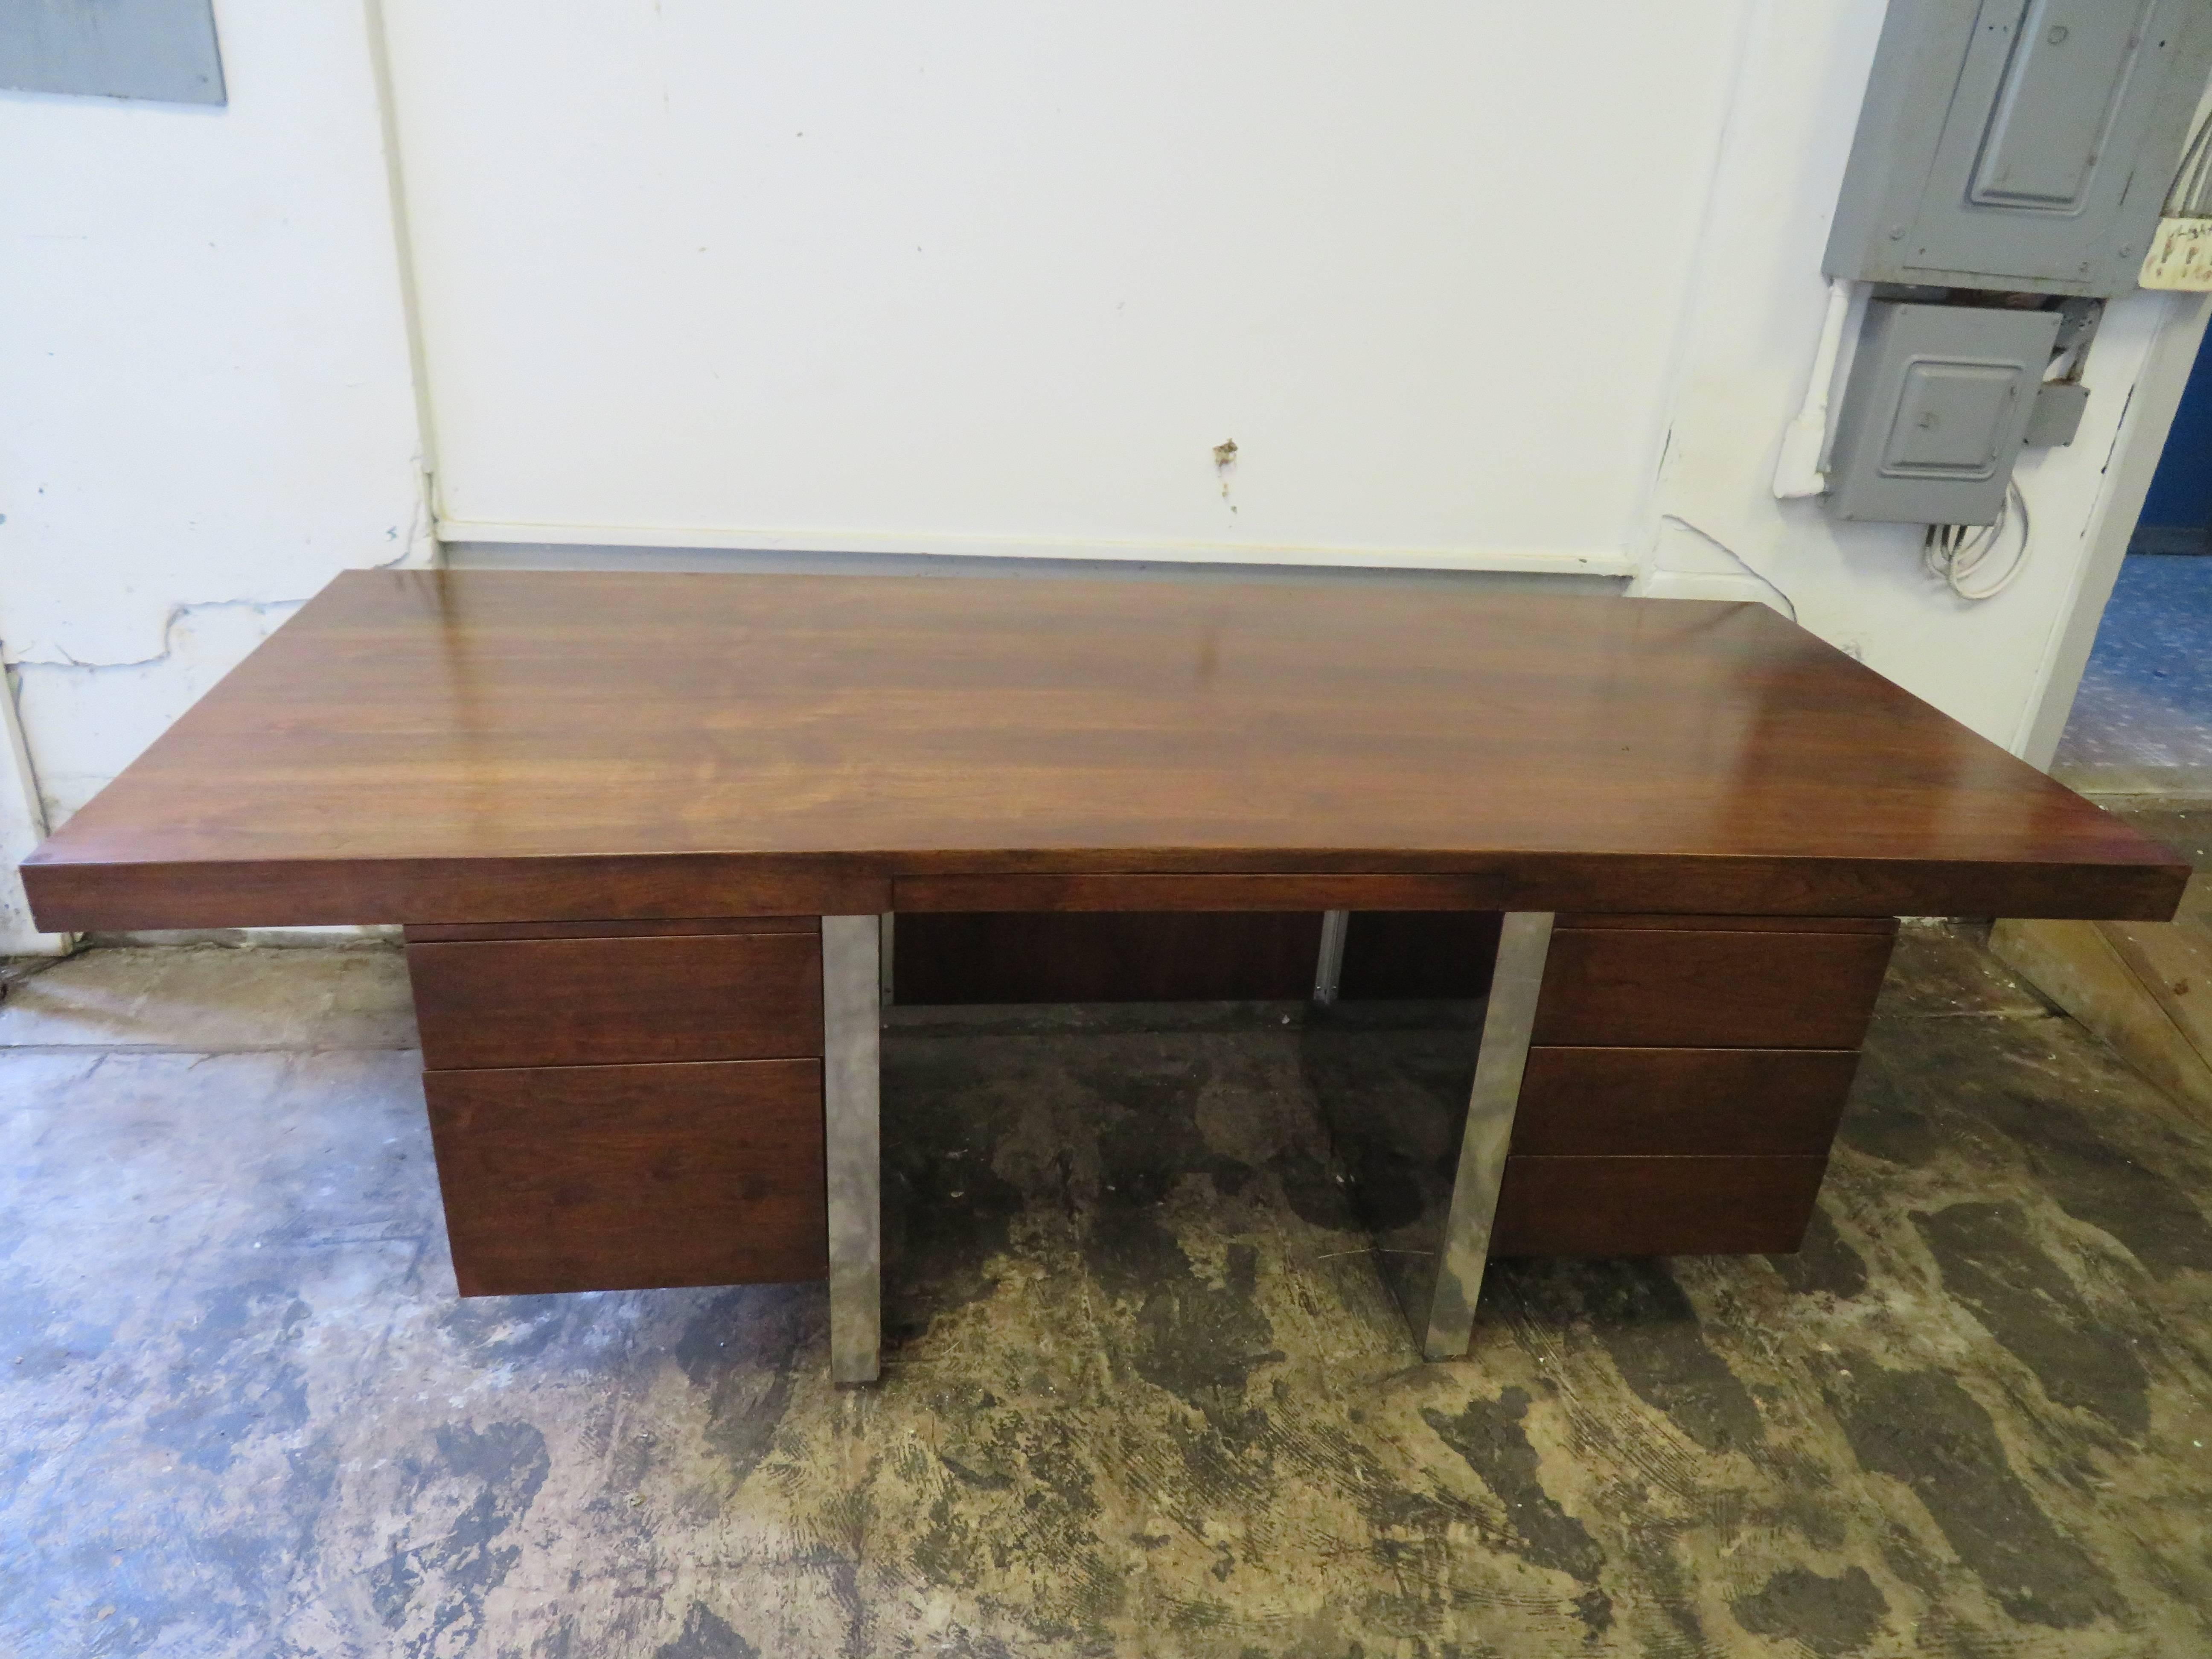 Large-scale Mid-Century Modern executive desk designed by Roger Sprunger for Dunbar. Gorgeous walnut with stainless steel double pedestal base. Four drawers including one file, two regular and central slender pencil drawer. Two pullout trays are